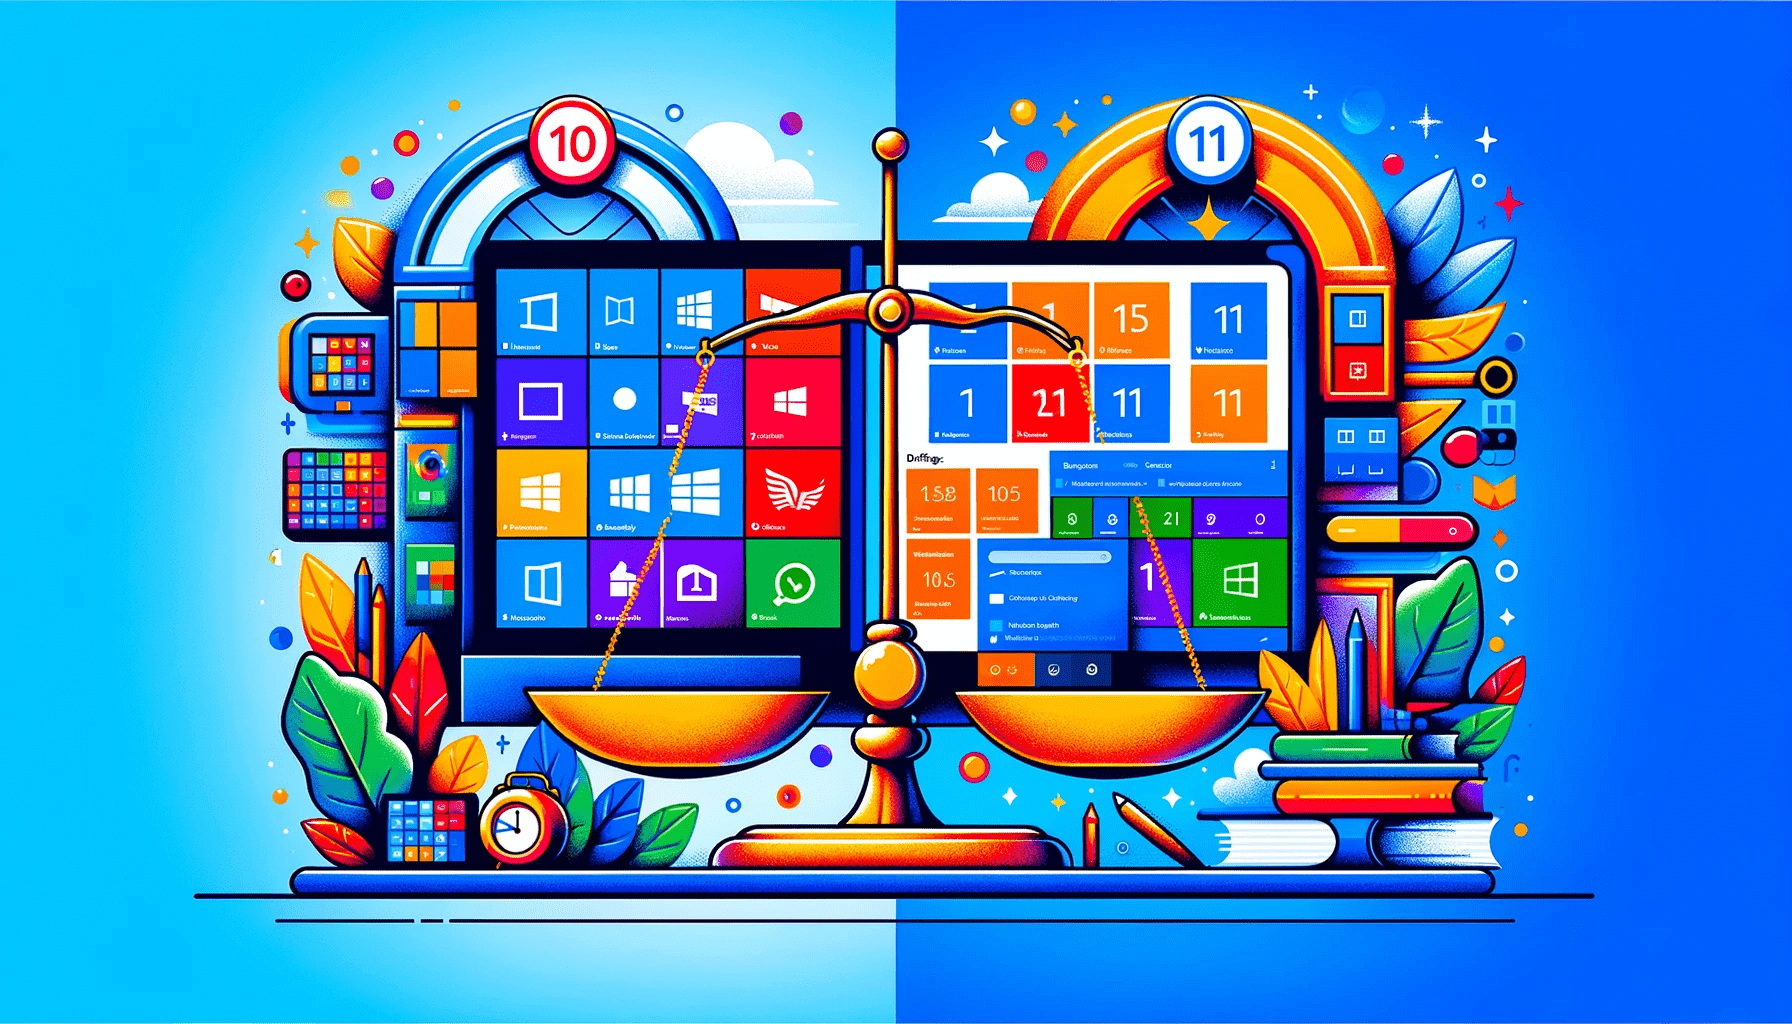 Windows 10 vs. Windows 11: What Are the Key Differences?